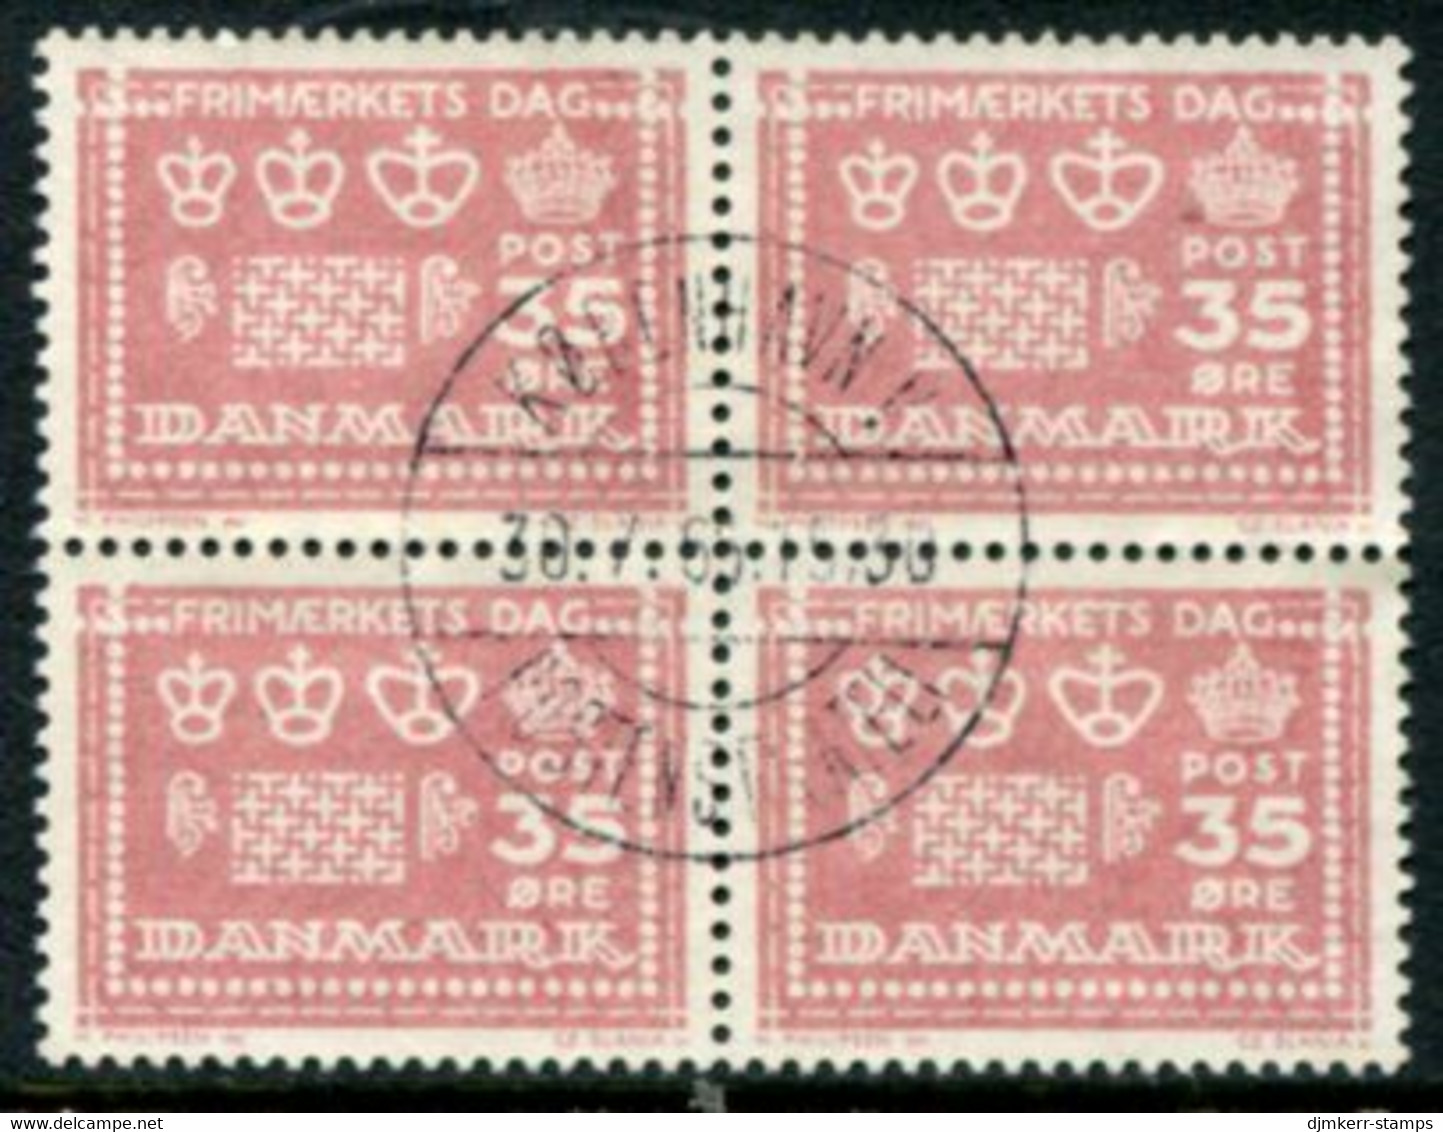 DENMARK 1964 Stamp Day Block Of 4 Used   Michel 425y - Used Stamps